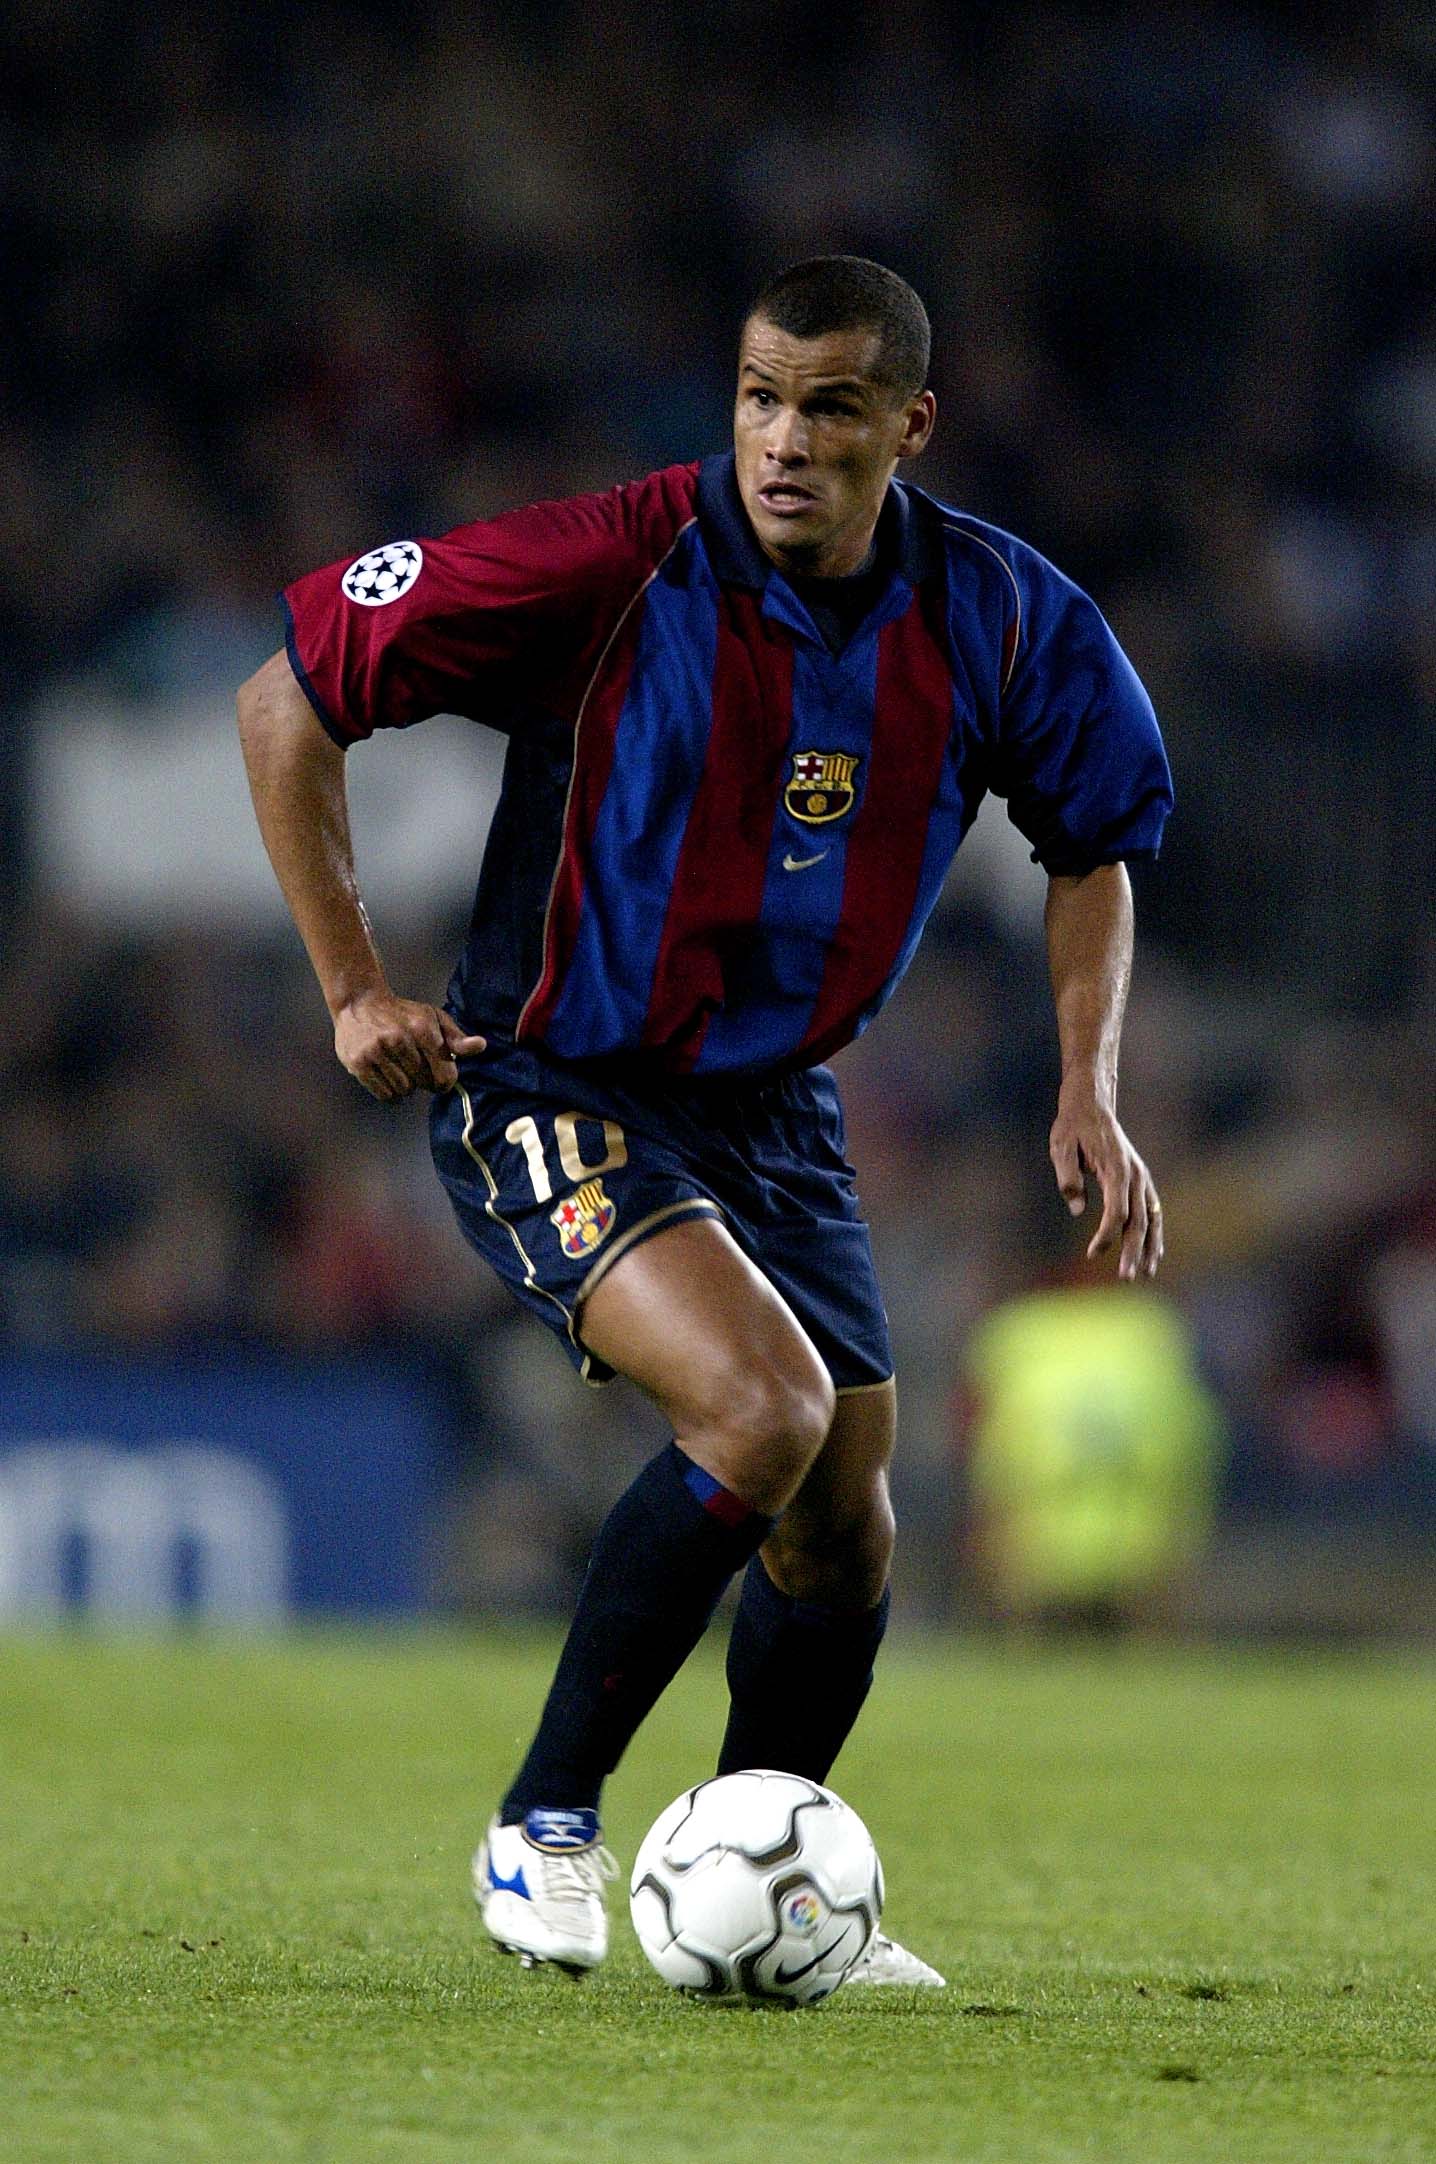 9 Apr 2002: Rivaldo of Barcelona in action during the Champions League quarter final, 2nd leg match between Barcelona and Panathinaikos at the Nou Camp Stadium, Barcelona, Spain. DIGITAL IMAGE Mandatory Credit: Gary M. Prior/Getty Images